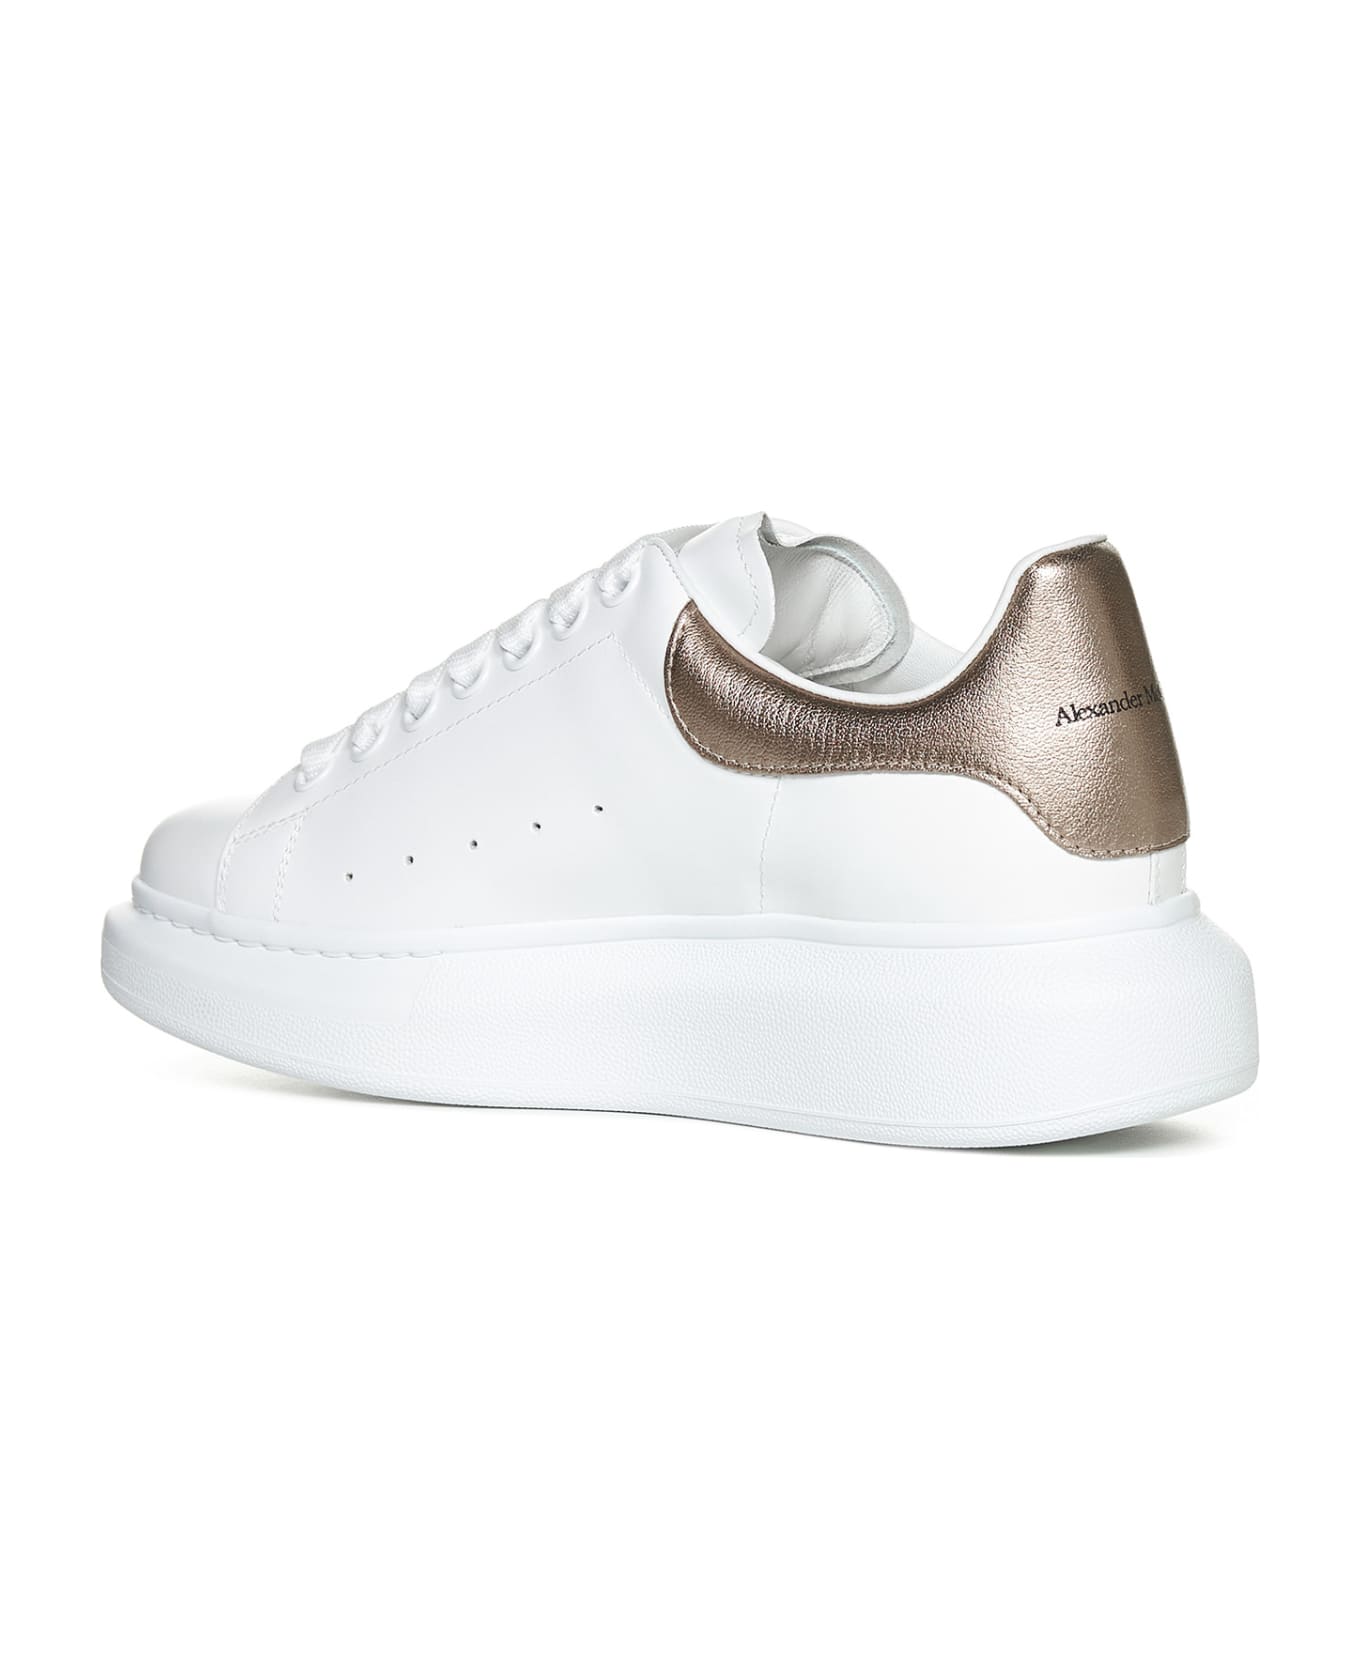 Alexander McQueen Sneakers - White rose gold 171